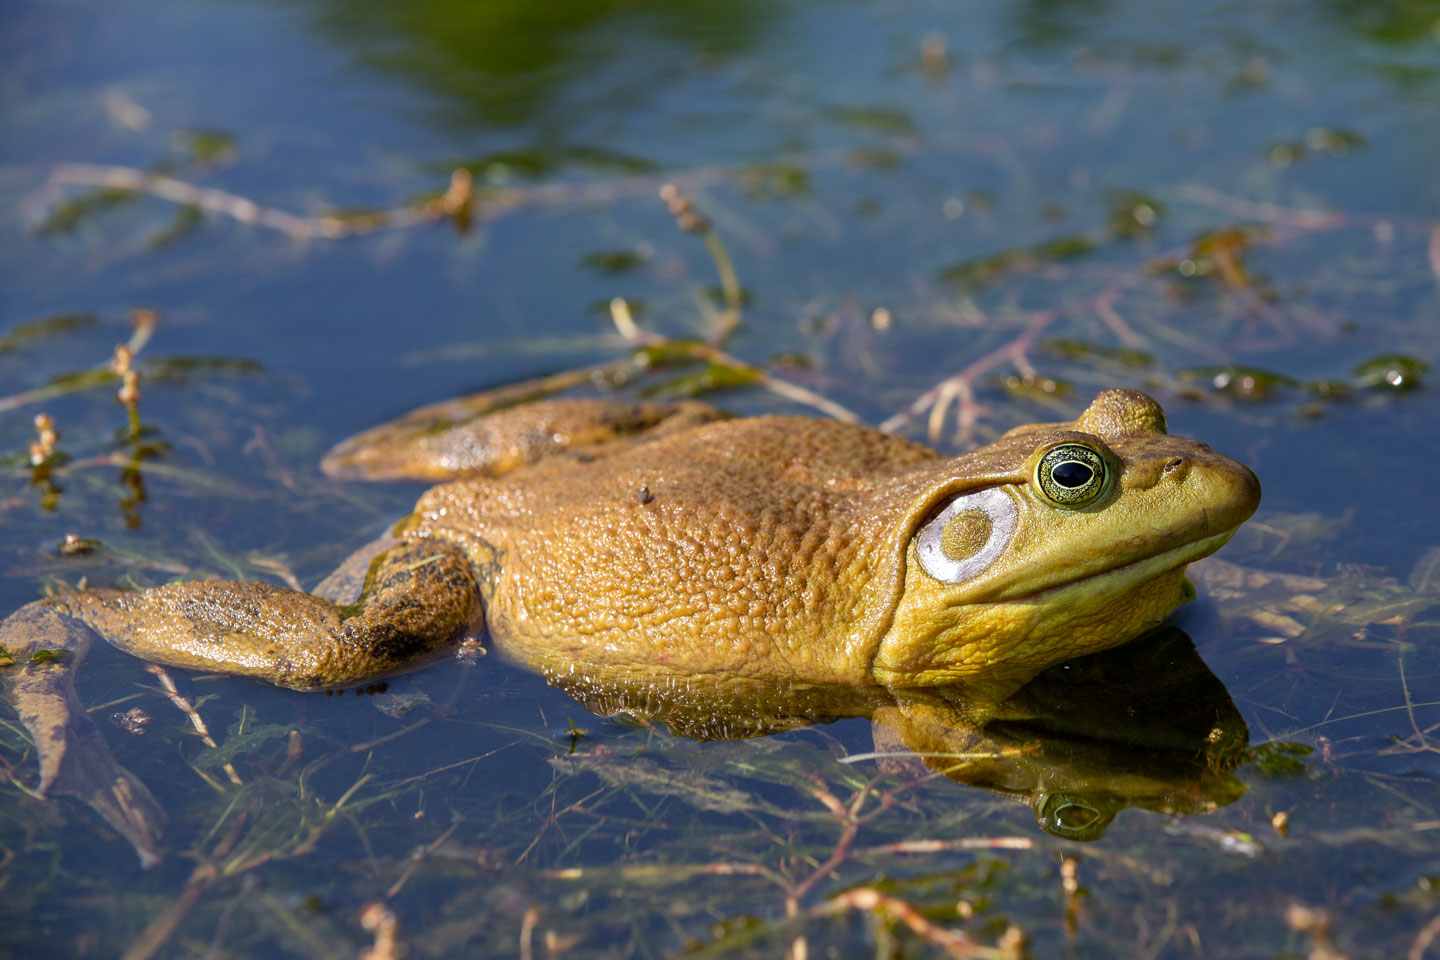 Close-up of an American bullfrog in a lake